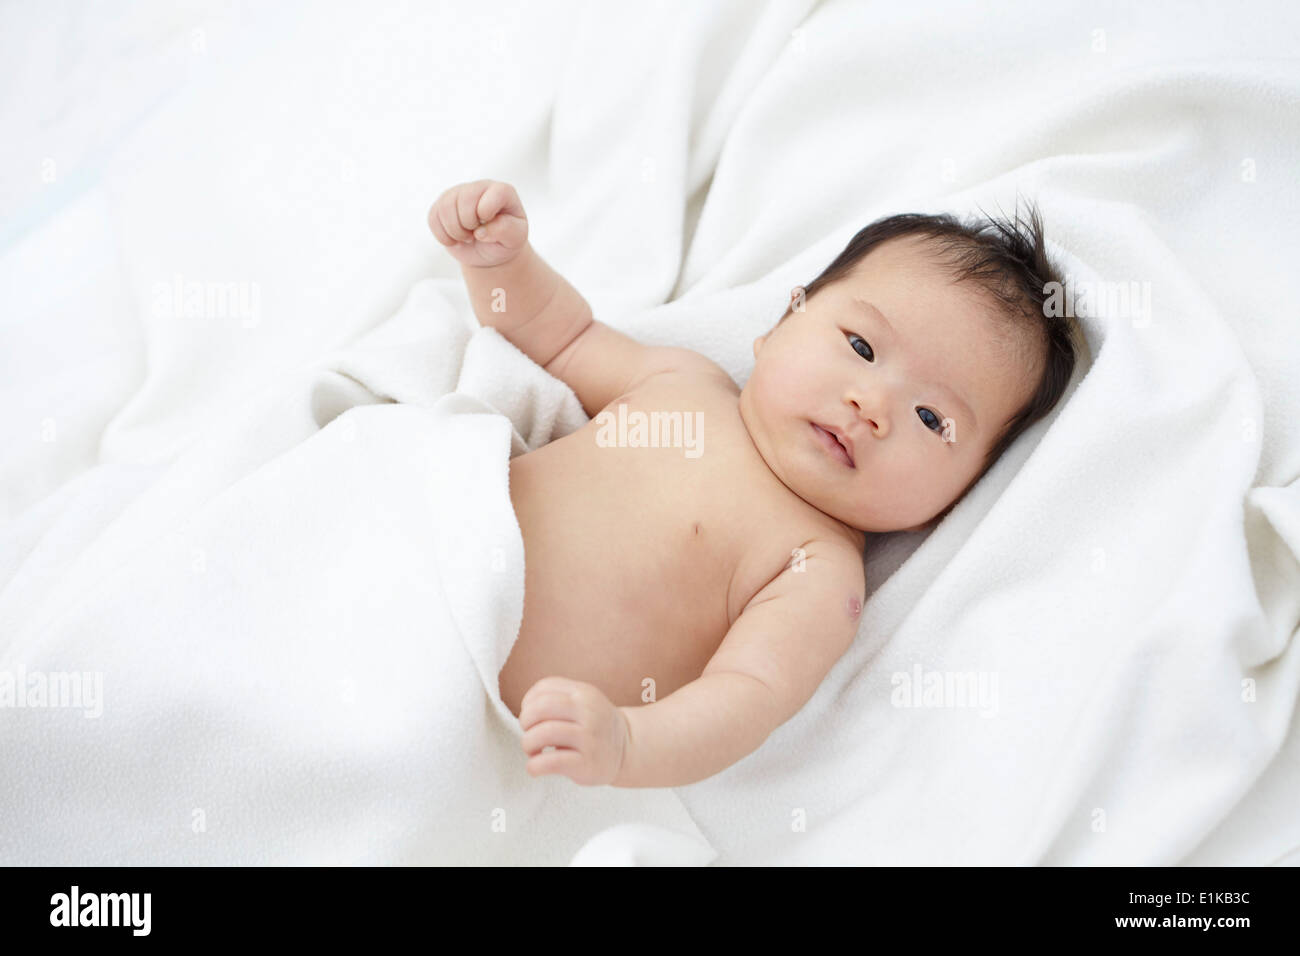 MODEL RELEASED Baby girl lying on white bedclothes portrait. Stock Photo